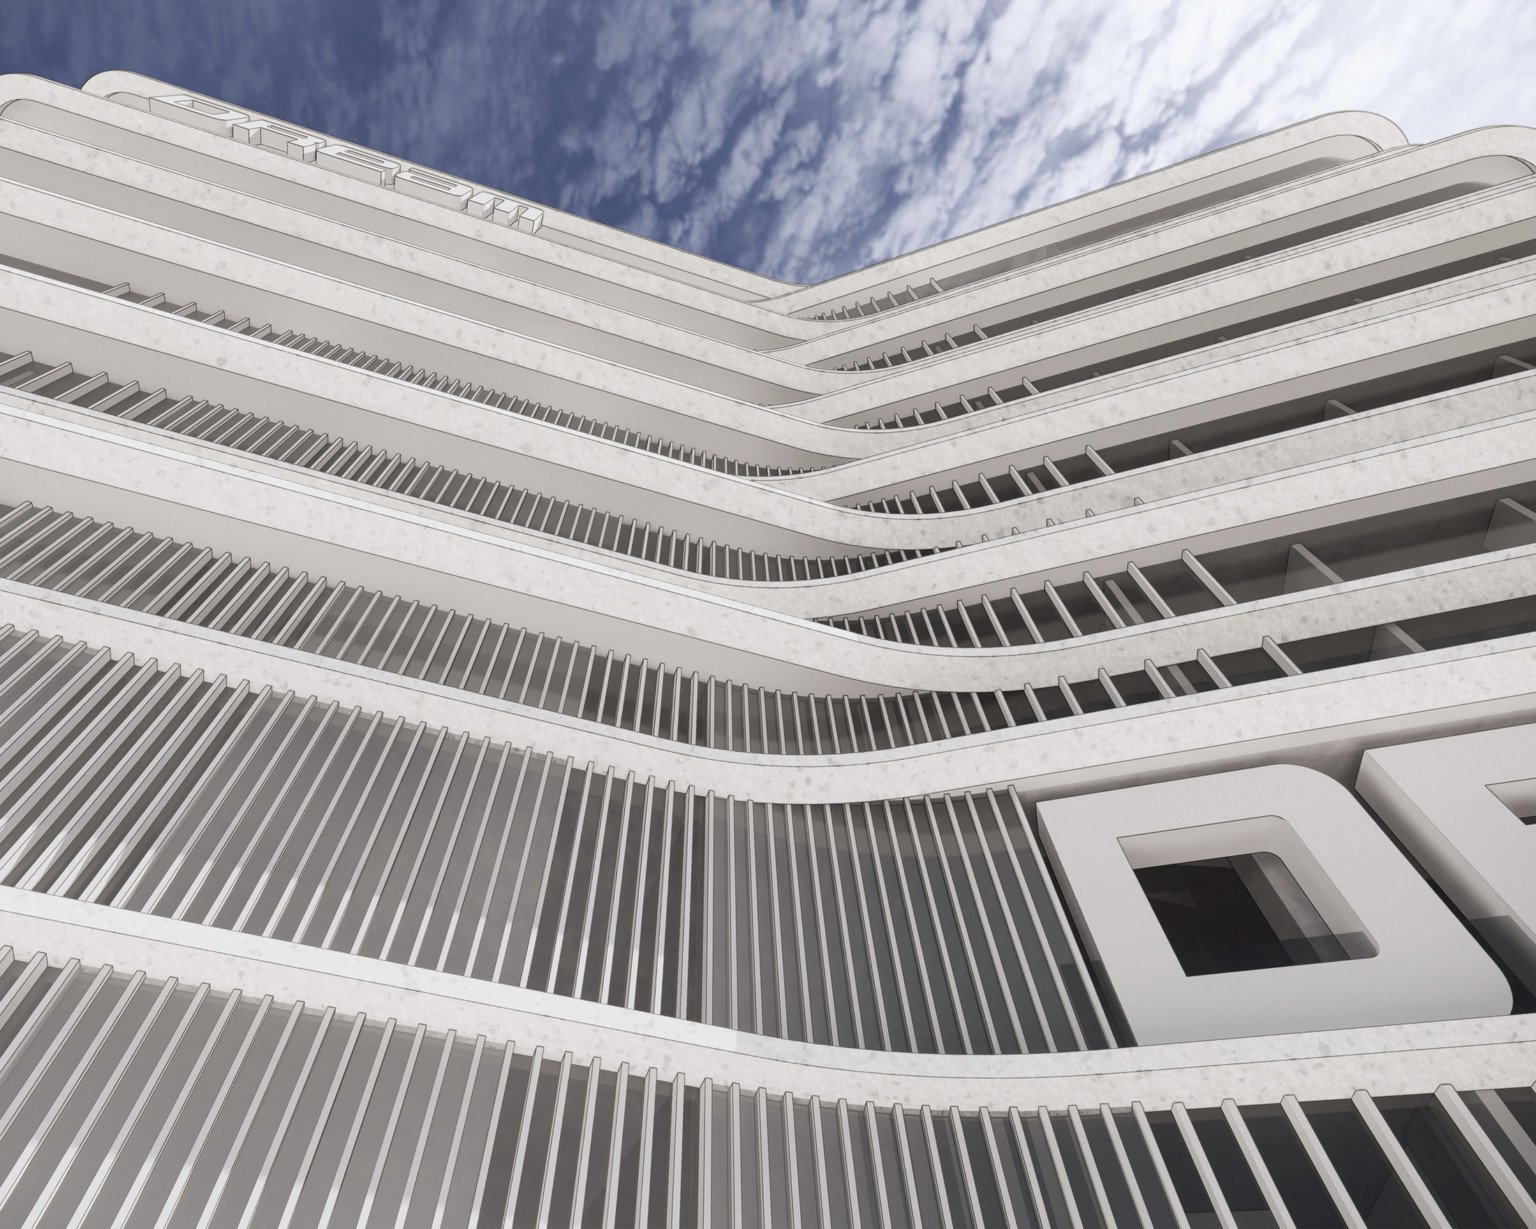 Rendering of hotel tower looking upwards. Levels curve at alternating points, weaving, with stone bars between stories